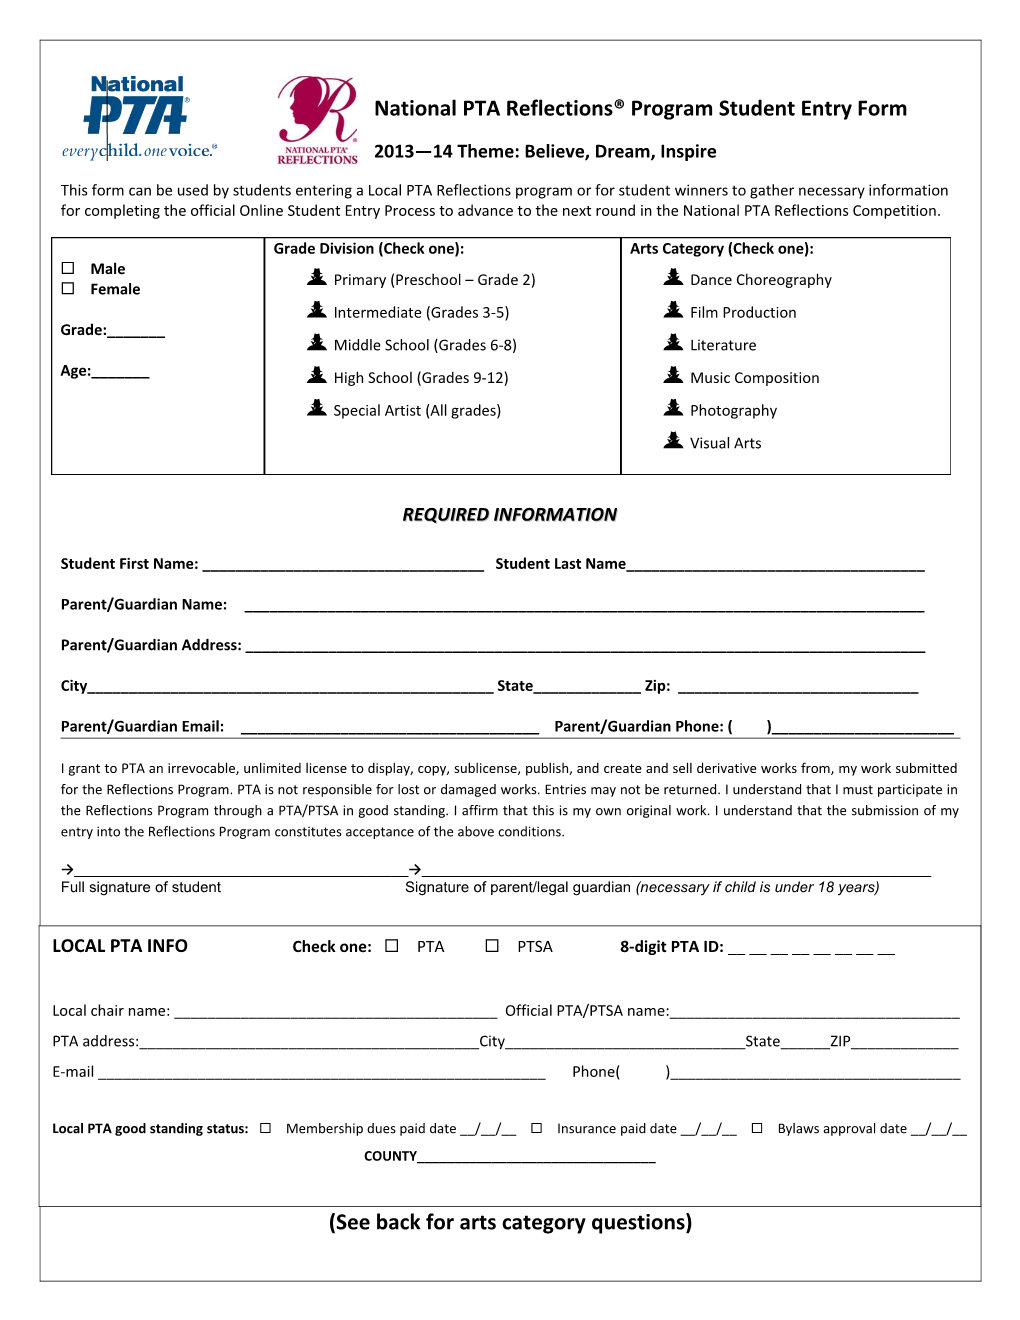 National PTA Reflections Program Student Entry Form